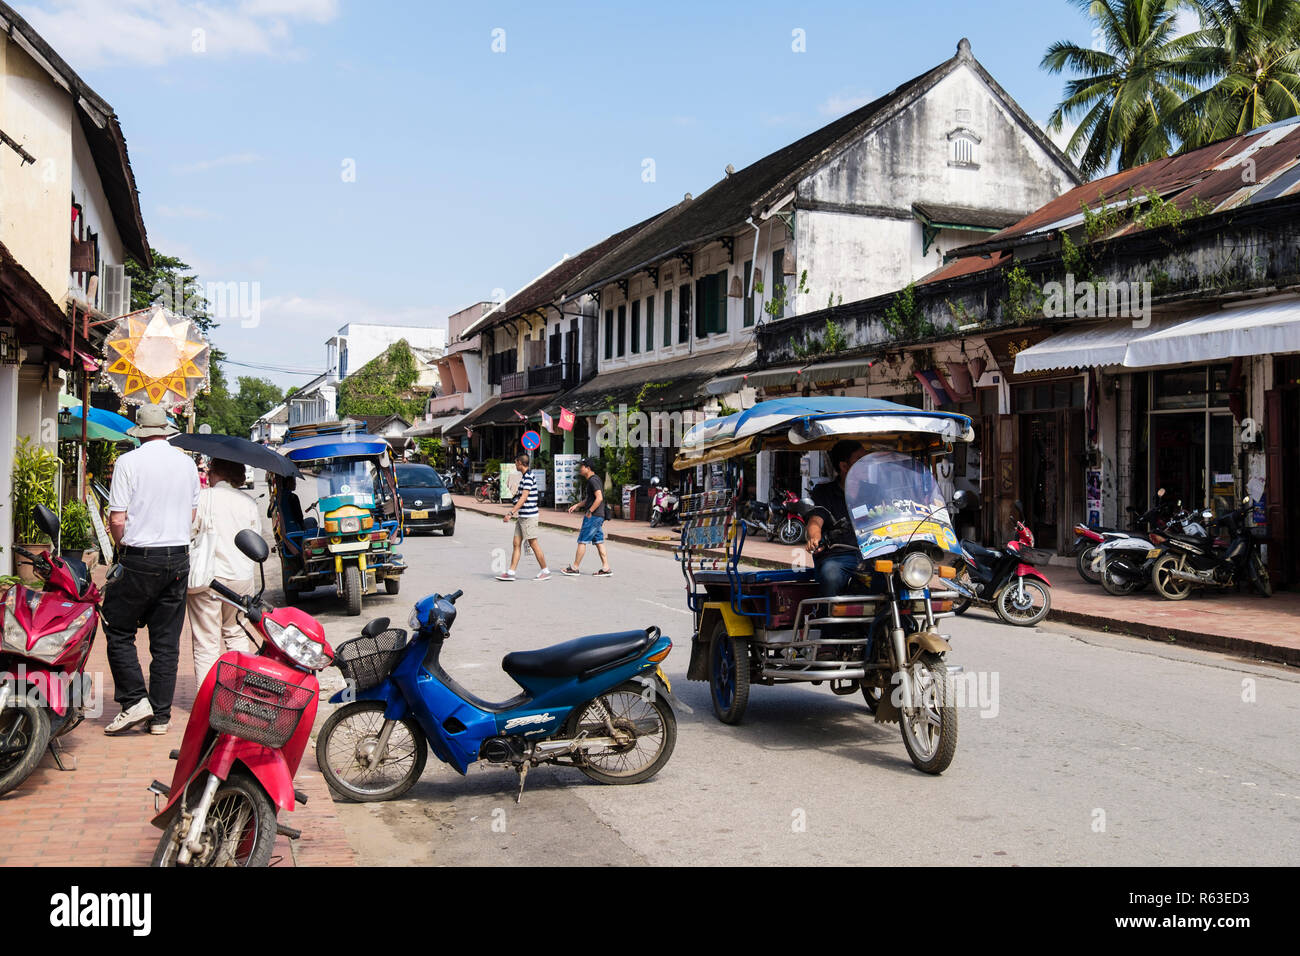 Typical street scene with Tuk Tuks and shops in colonial district of old city. Sisavangvong Road, Luang Prabang, Louangphabang province, Laos, Asia Stock Photo